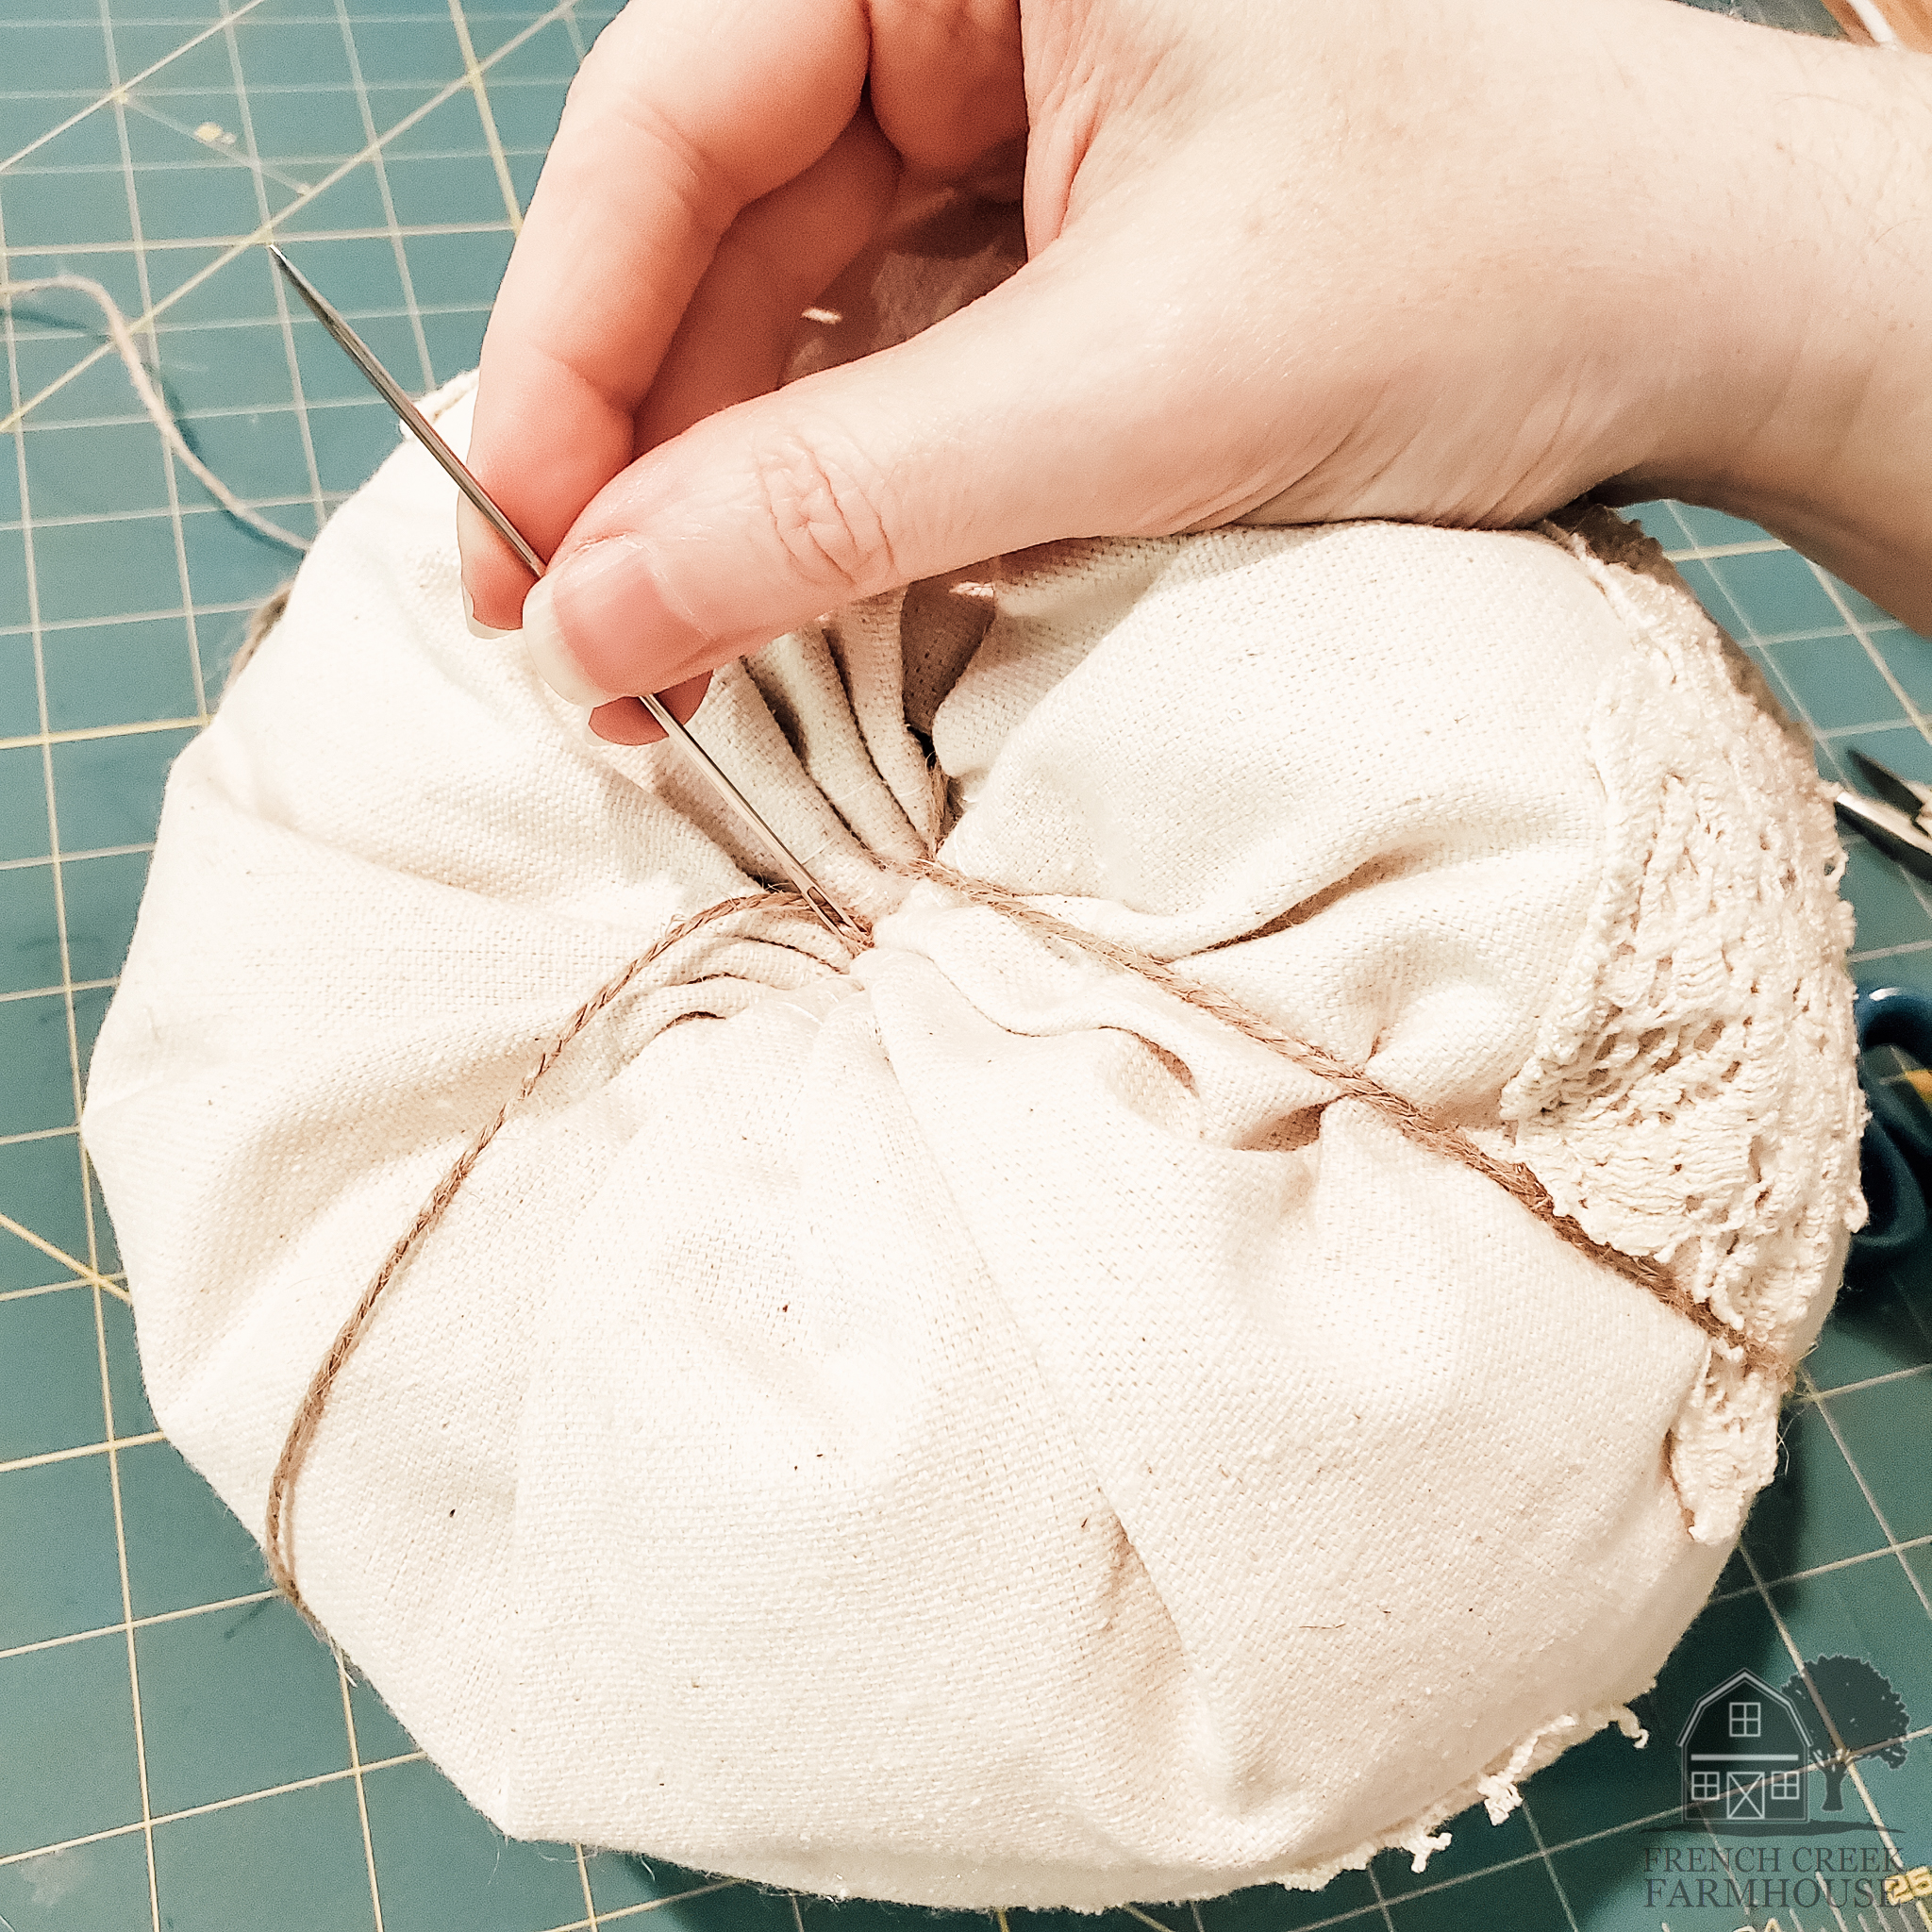 Use an upholstery needle for the stitching